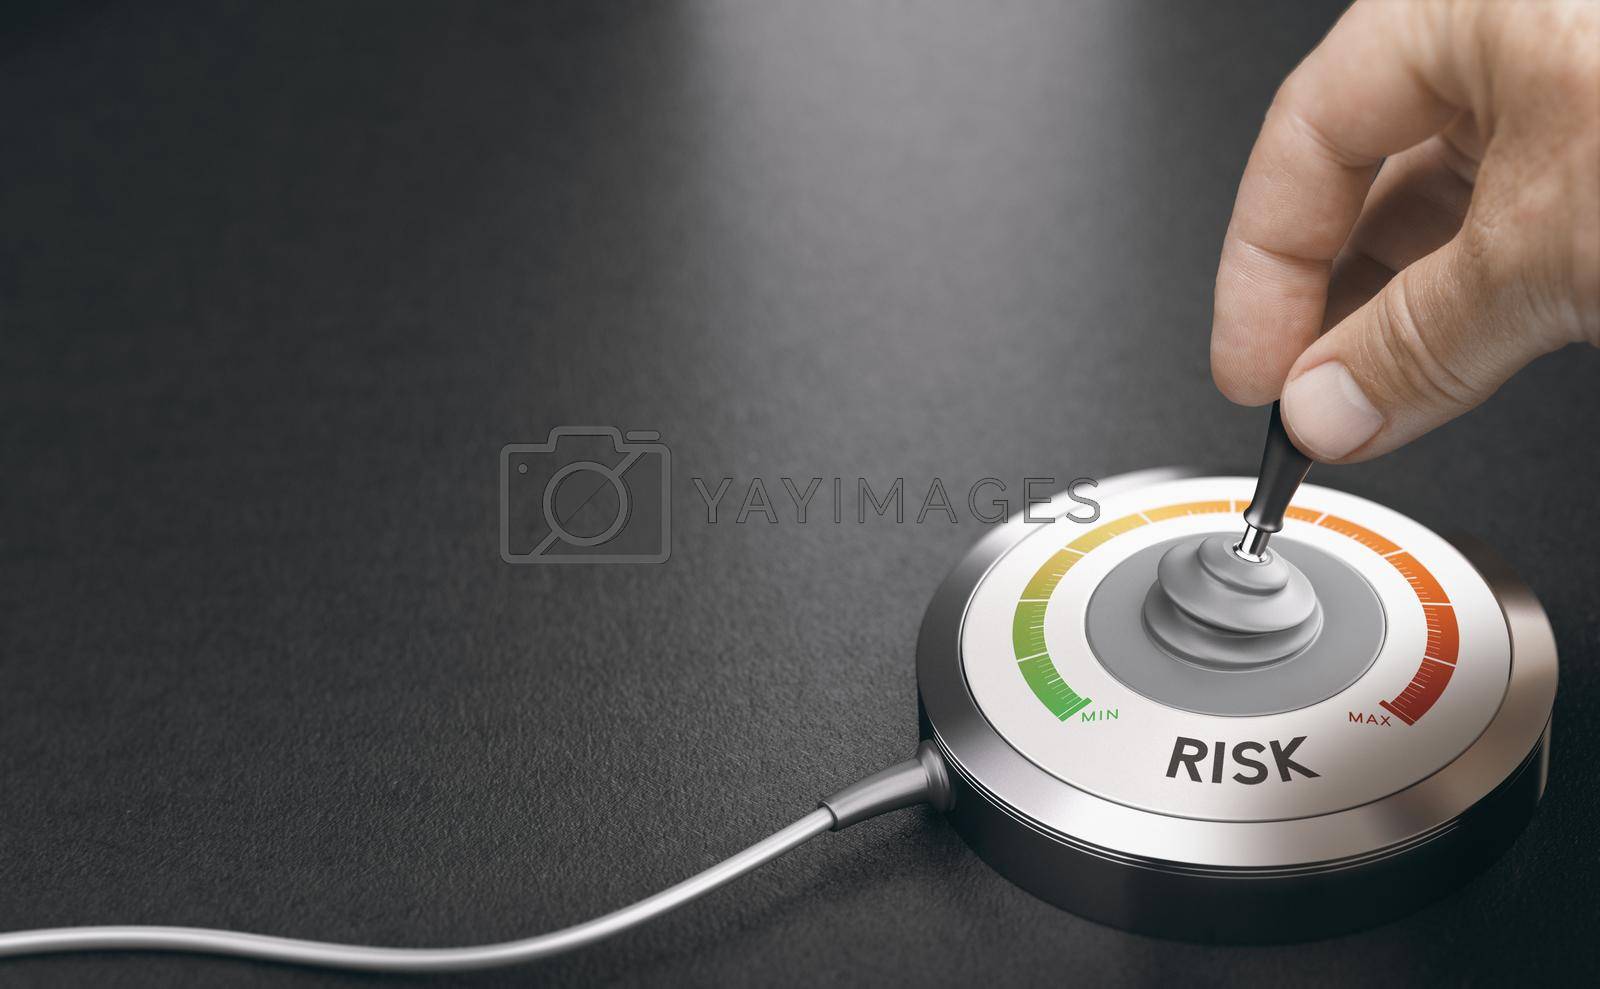 Man hand using a conceptual joystick over black background to monitor risk and make a risky choice. Composite image between a photography and a 3D background.